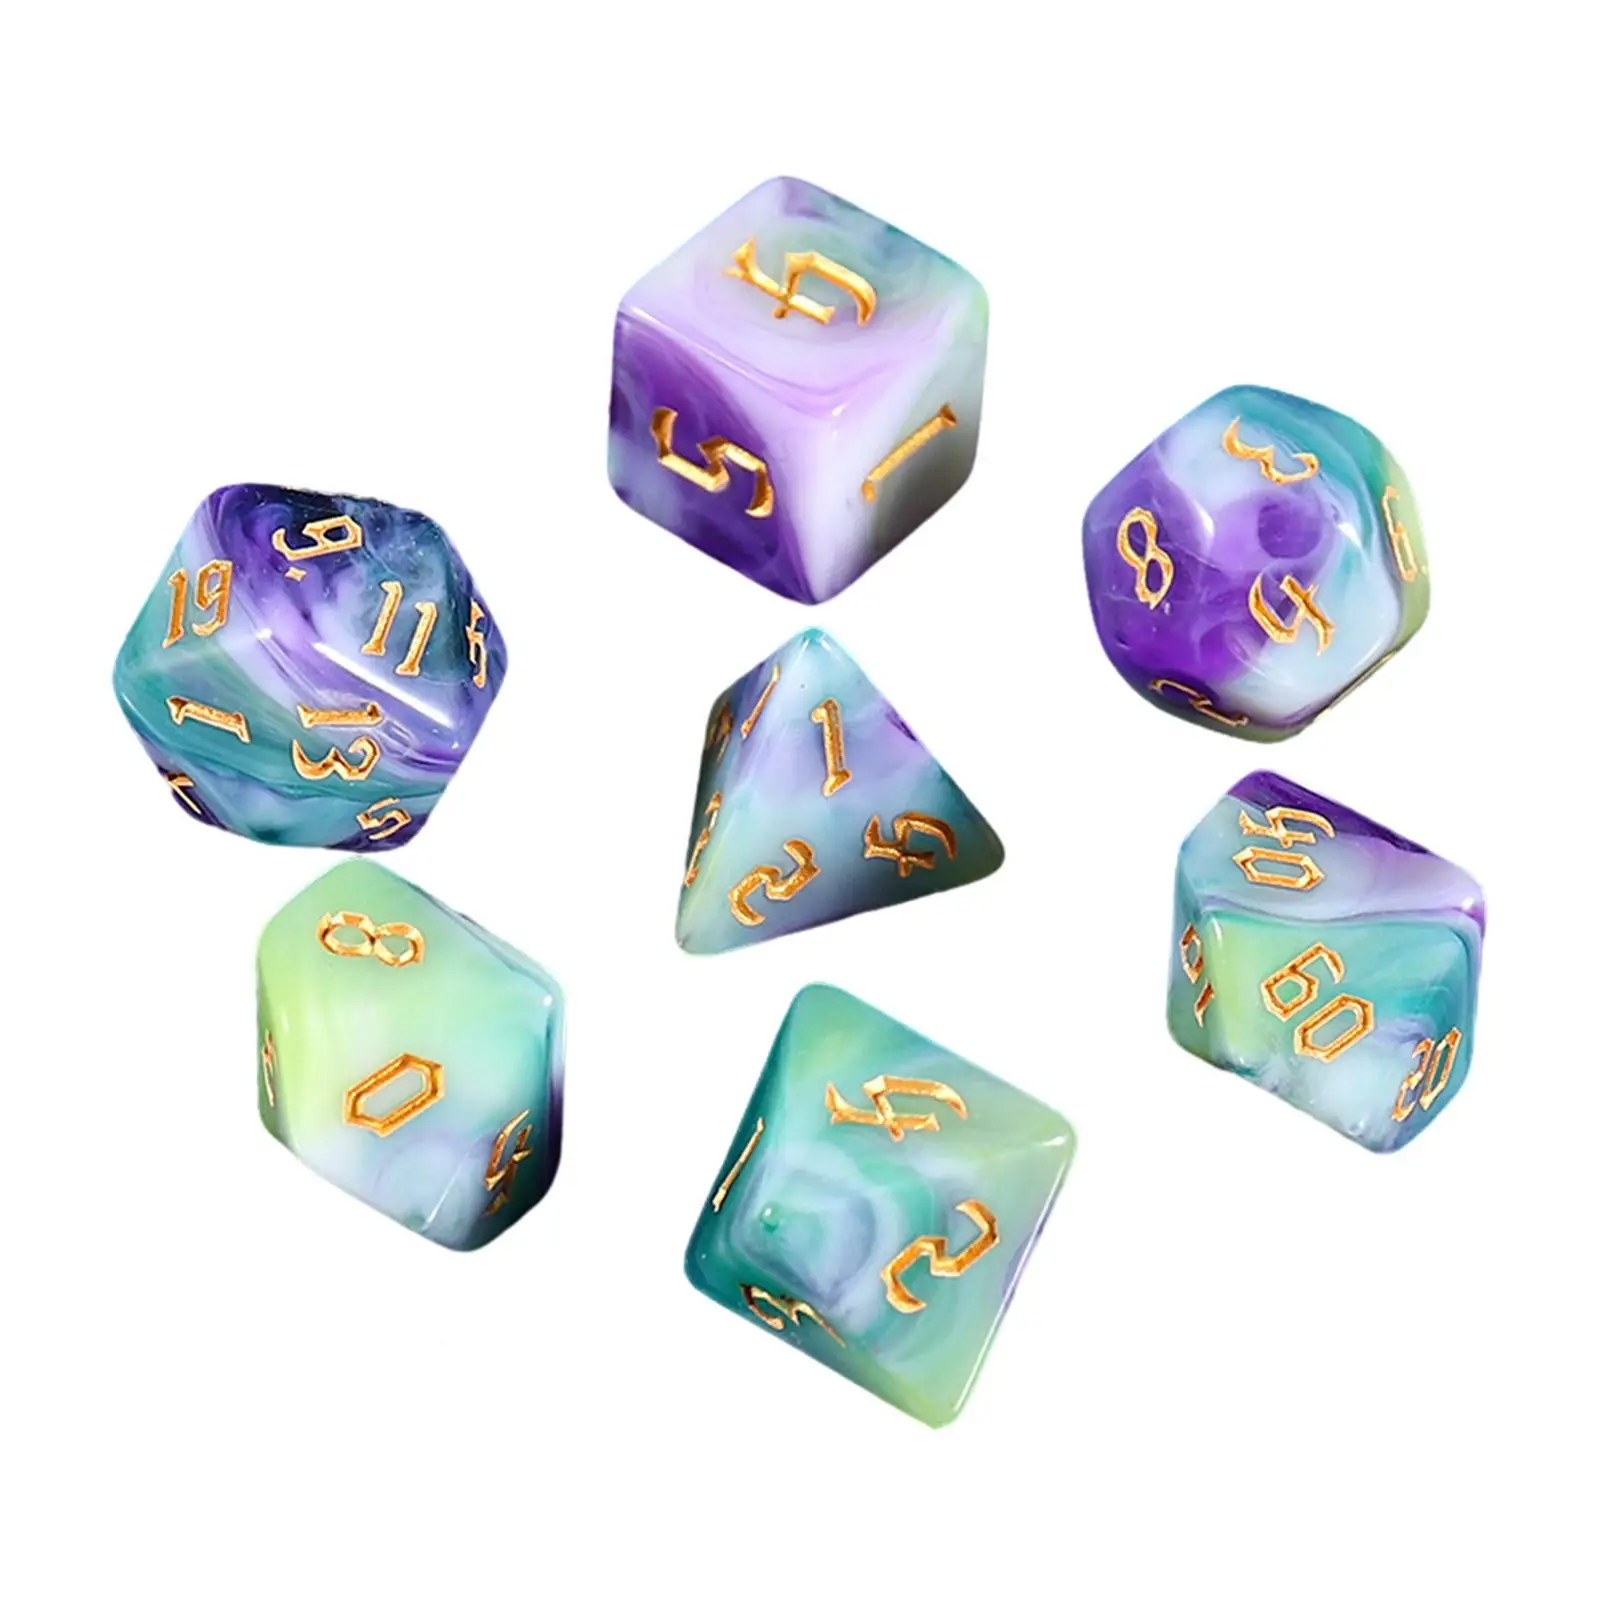 7x D4 D8 D10 D12 D20 Dices Classroom Accessories Party Toys Board Game Polyhedral Dices Set for Math Teaching RPG Card Games